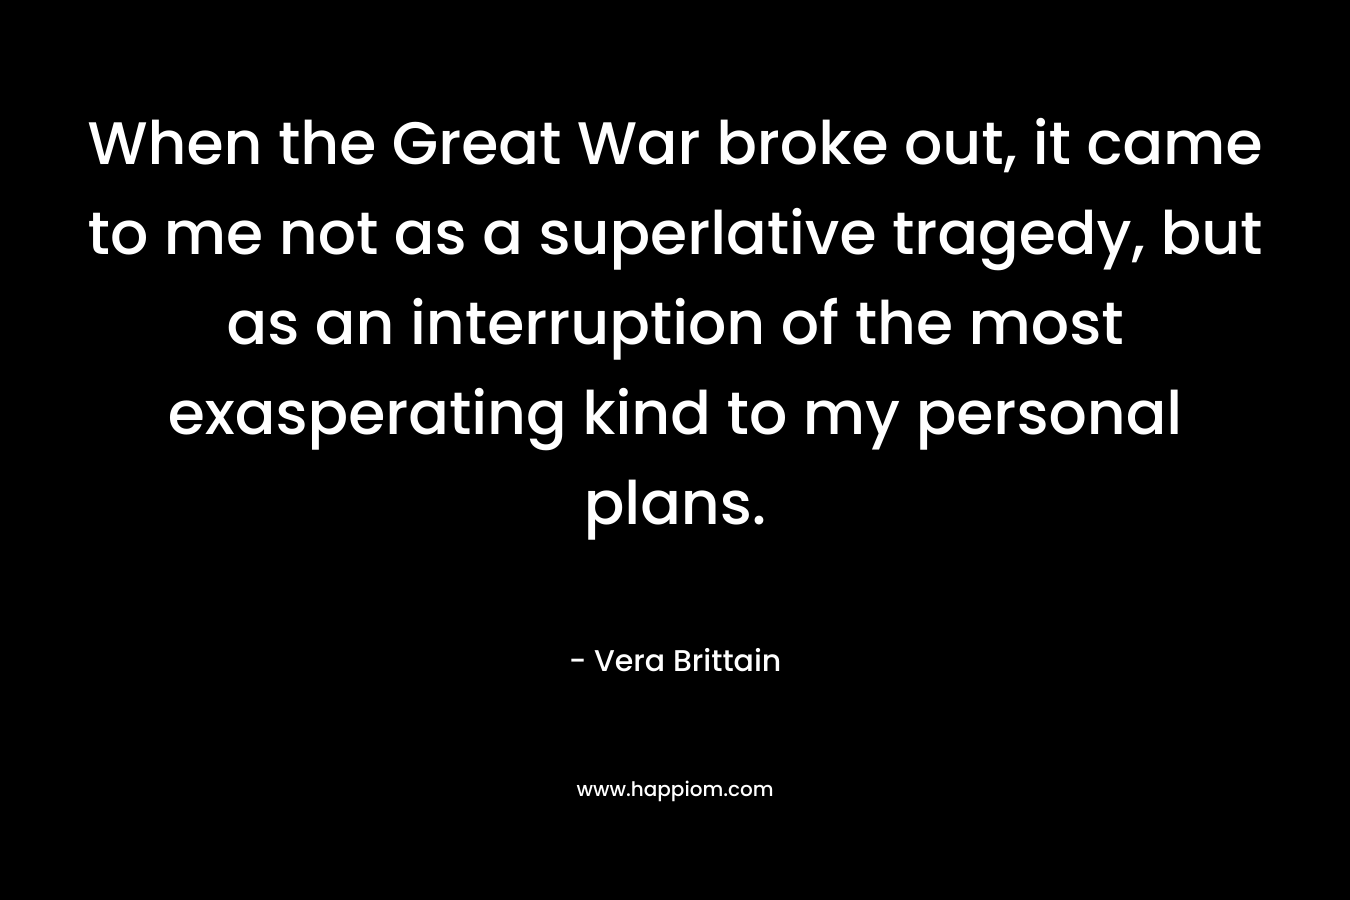 When the Great War broke out, it came to me not as a superlative tragedy, but as an interruption of the most exasperating kind to my personal plans.